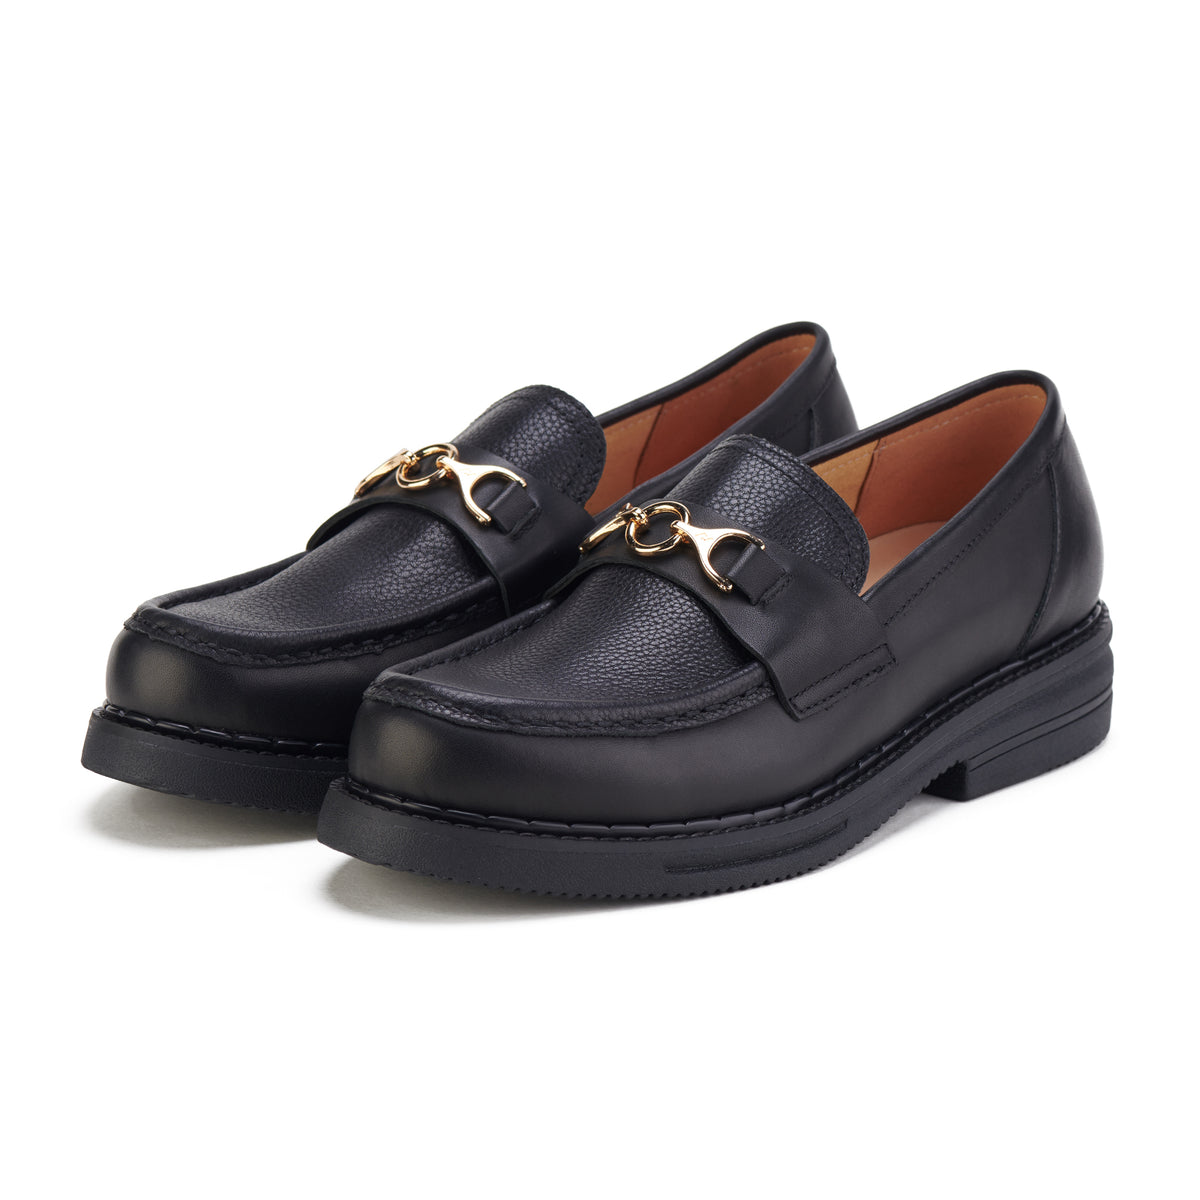 Loafer Rise All Black Tumble